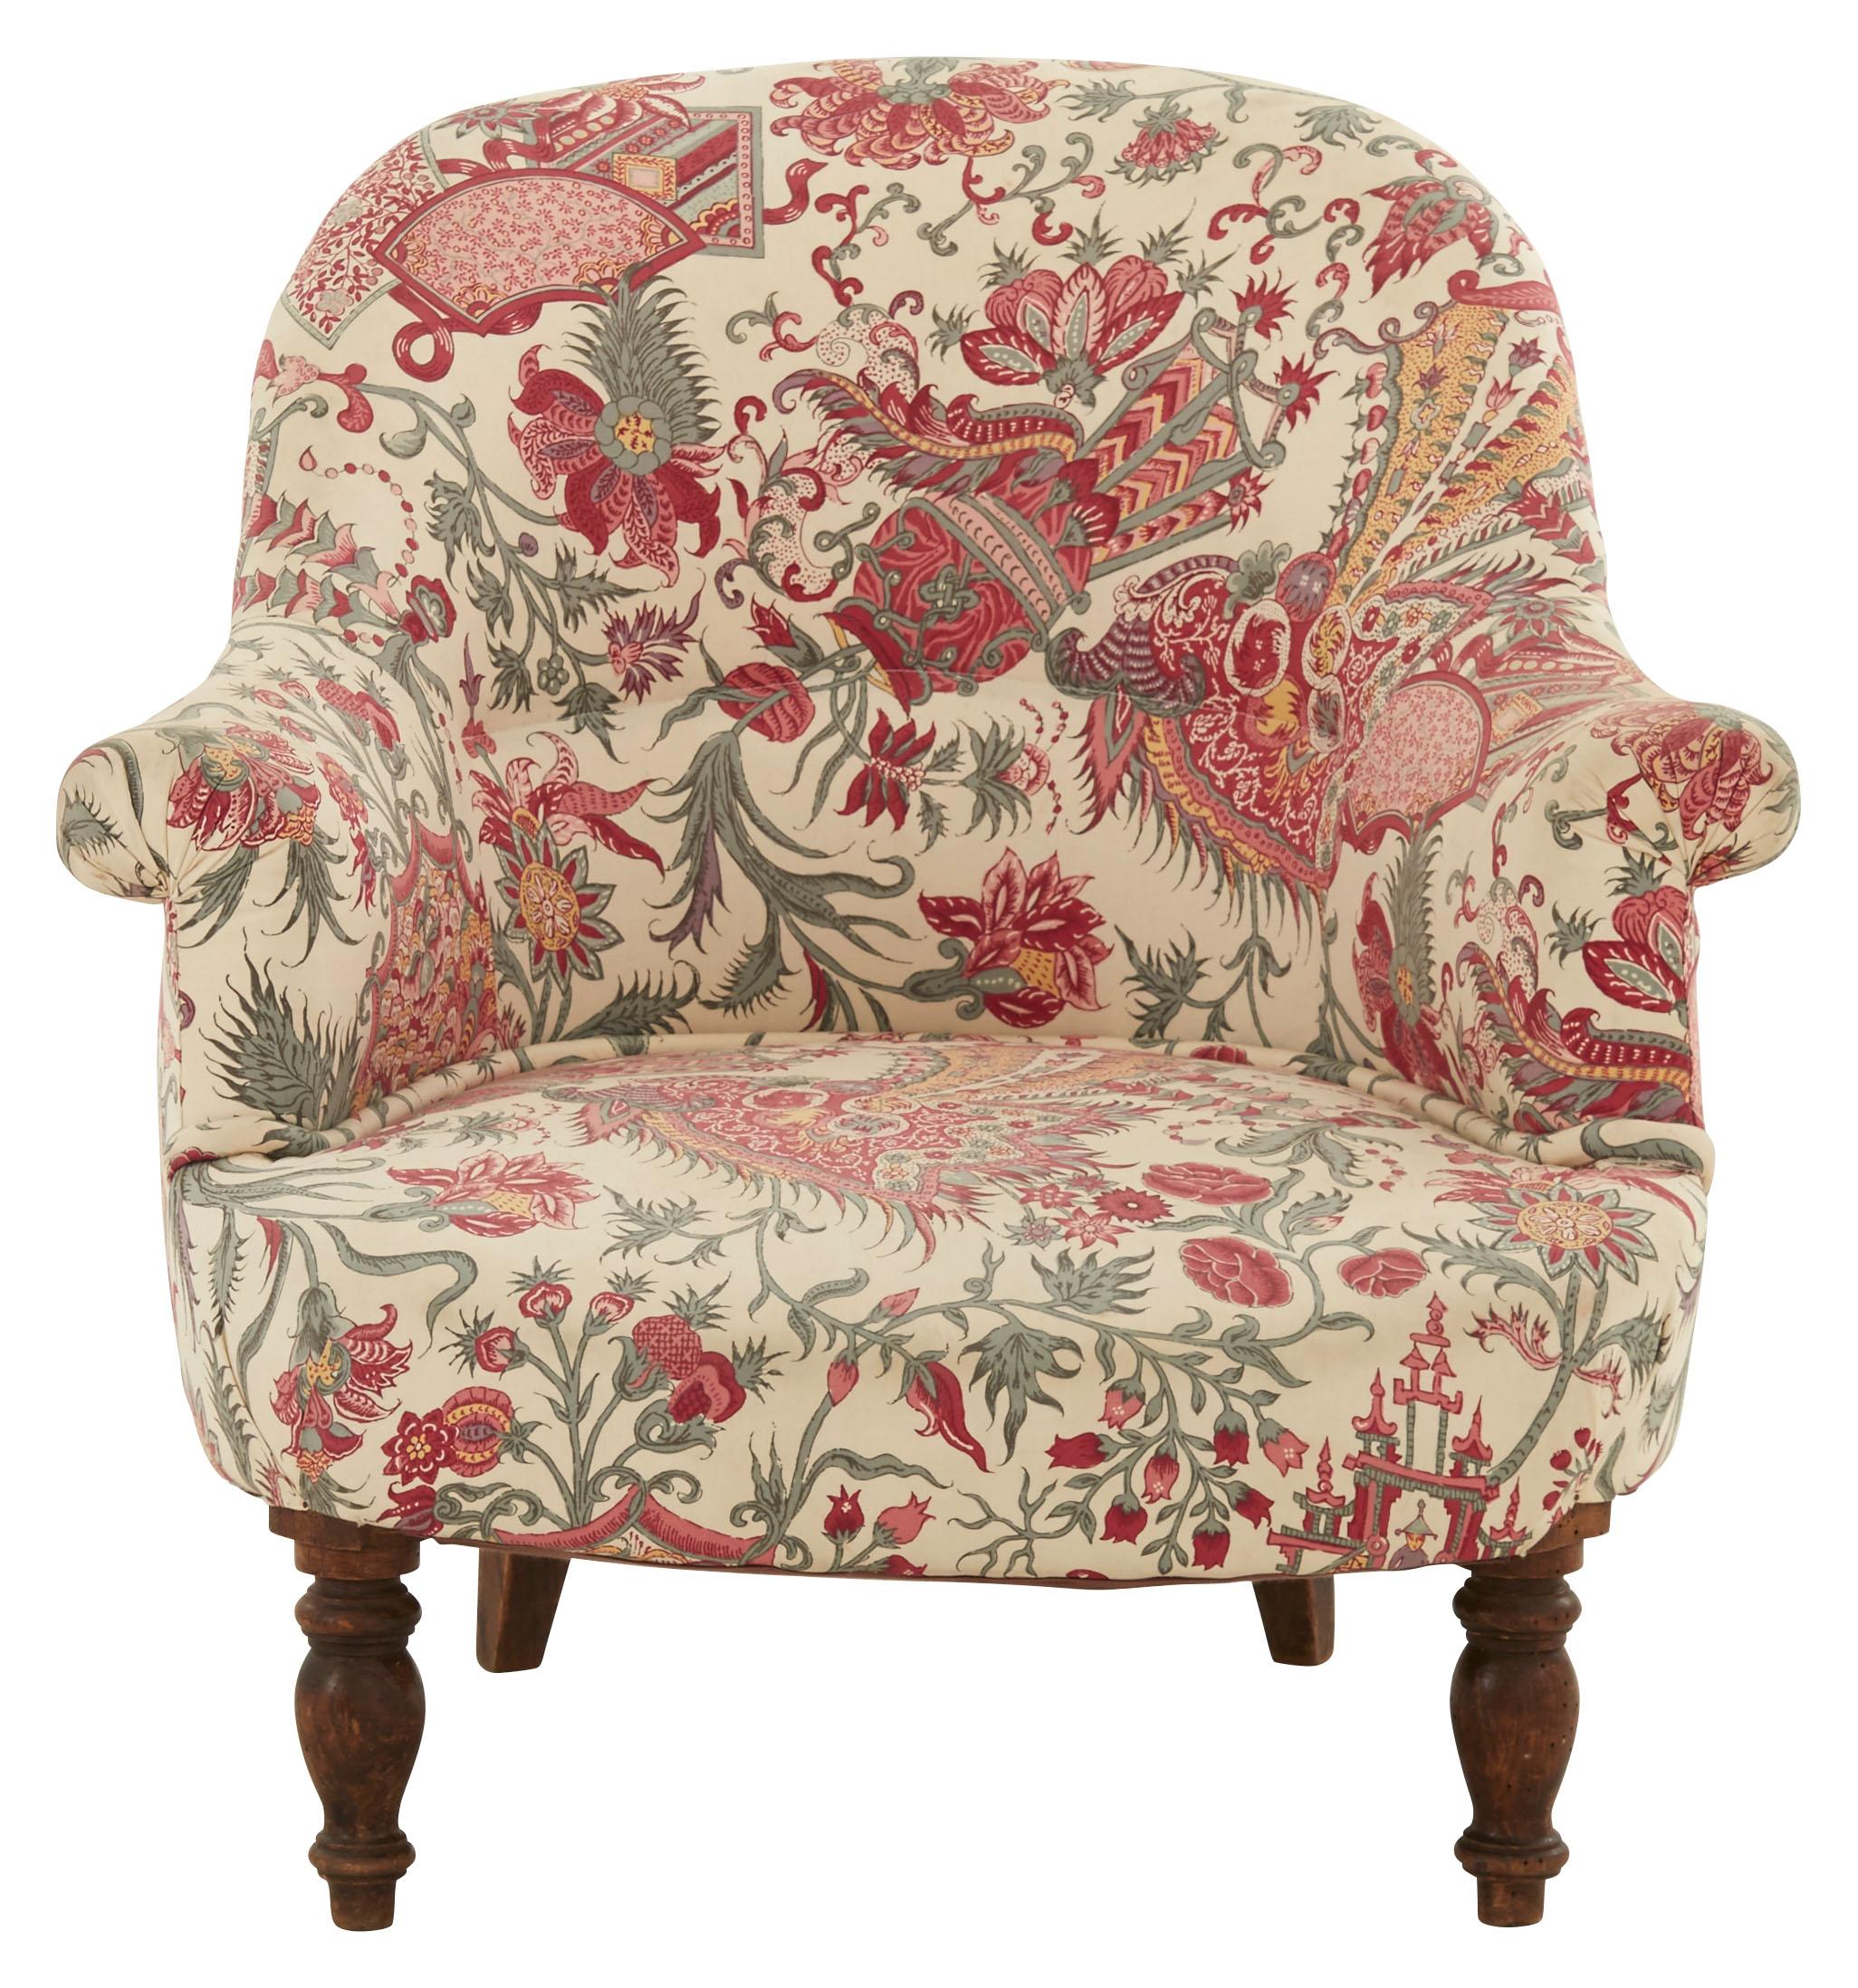 • Paisely upholstery as found
• Late 19th century
• France

Dimensions:
• 31